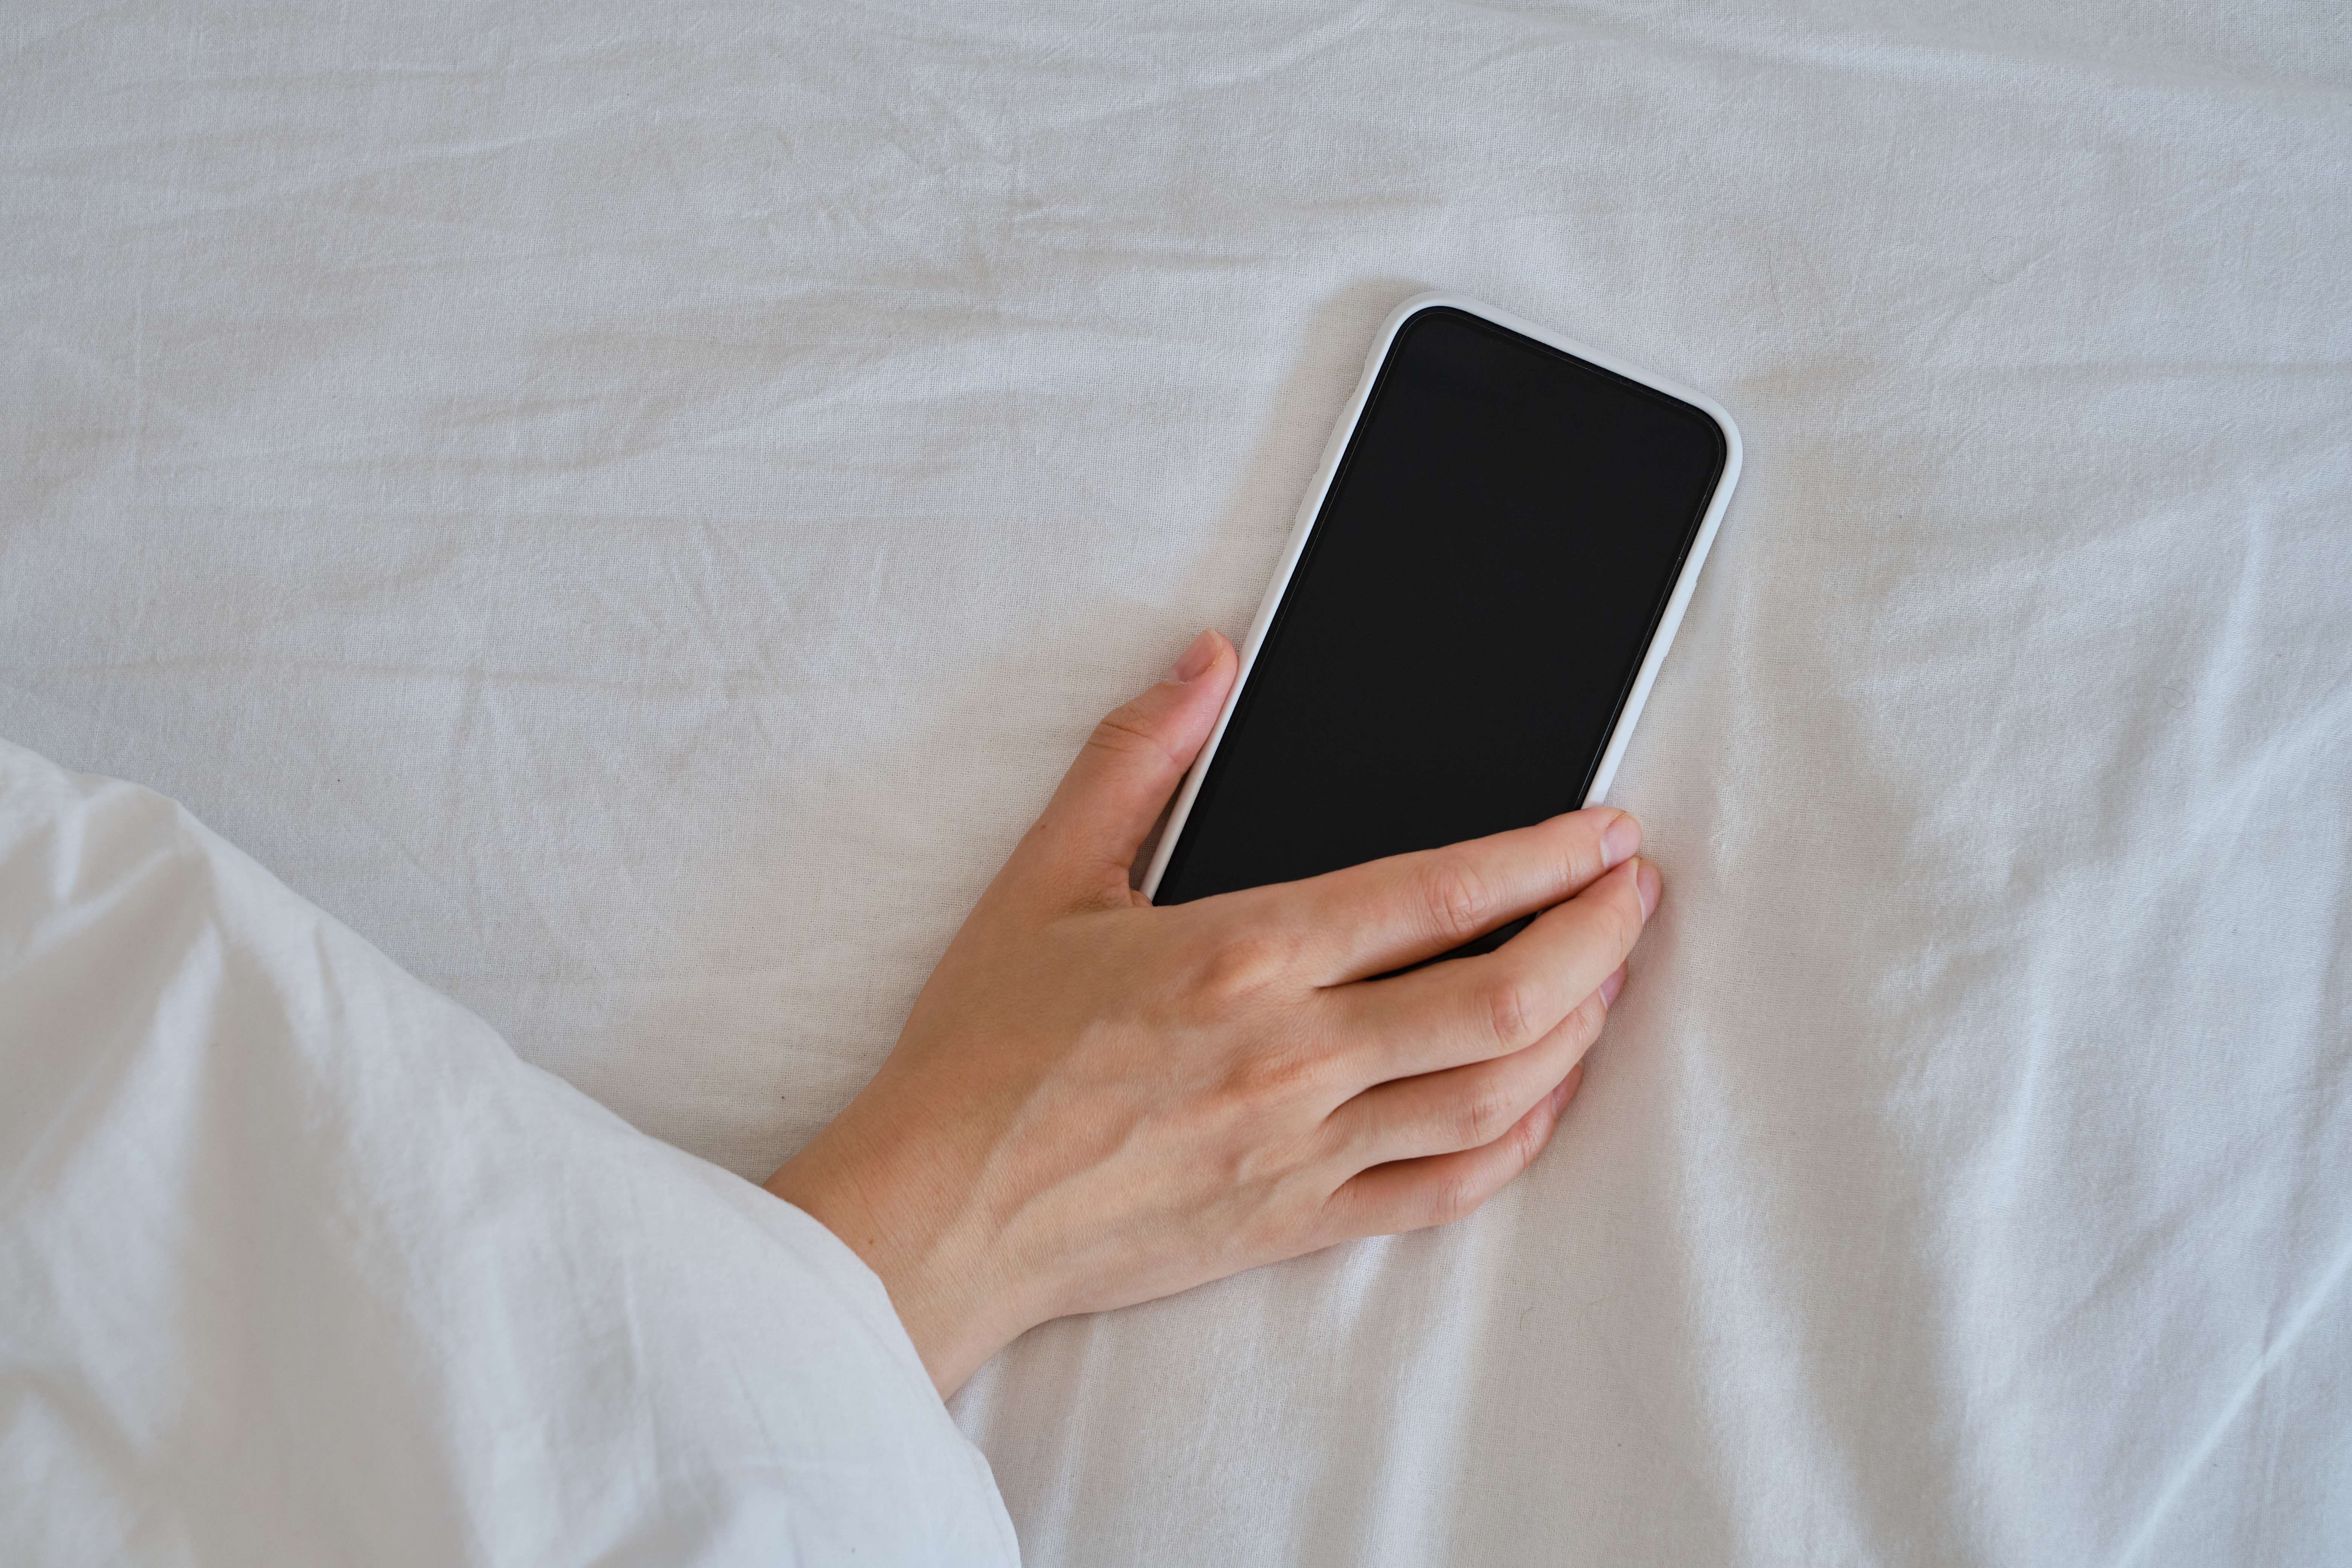 Close-up of a hand holding a smartphone in bed | Source: Shutterstock